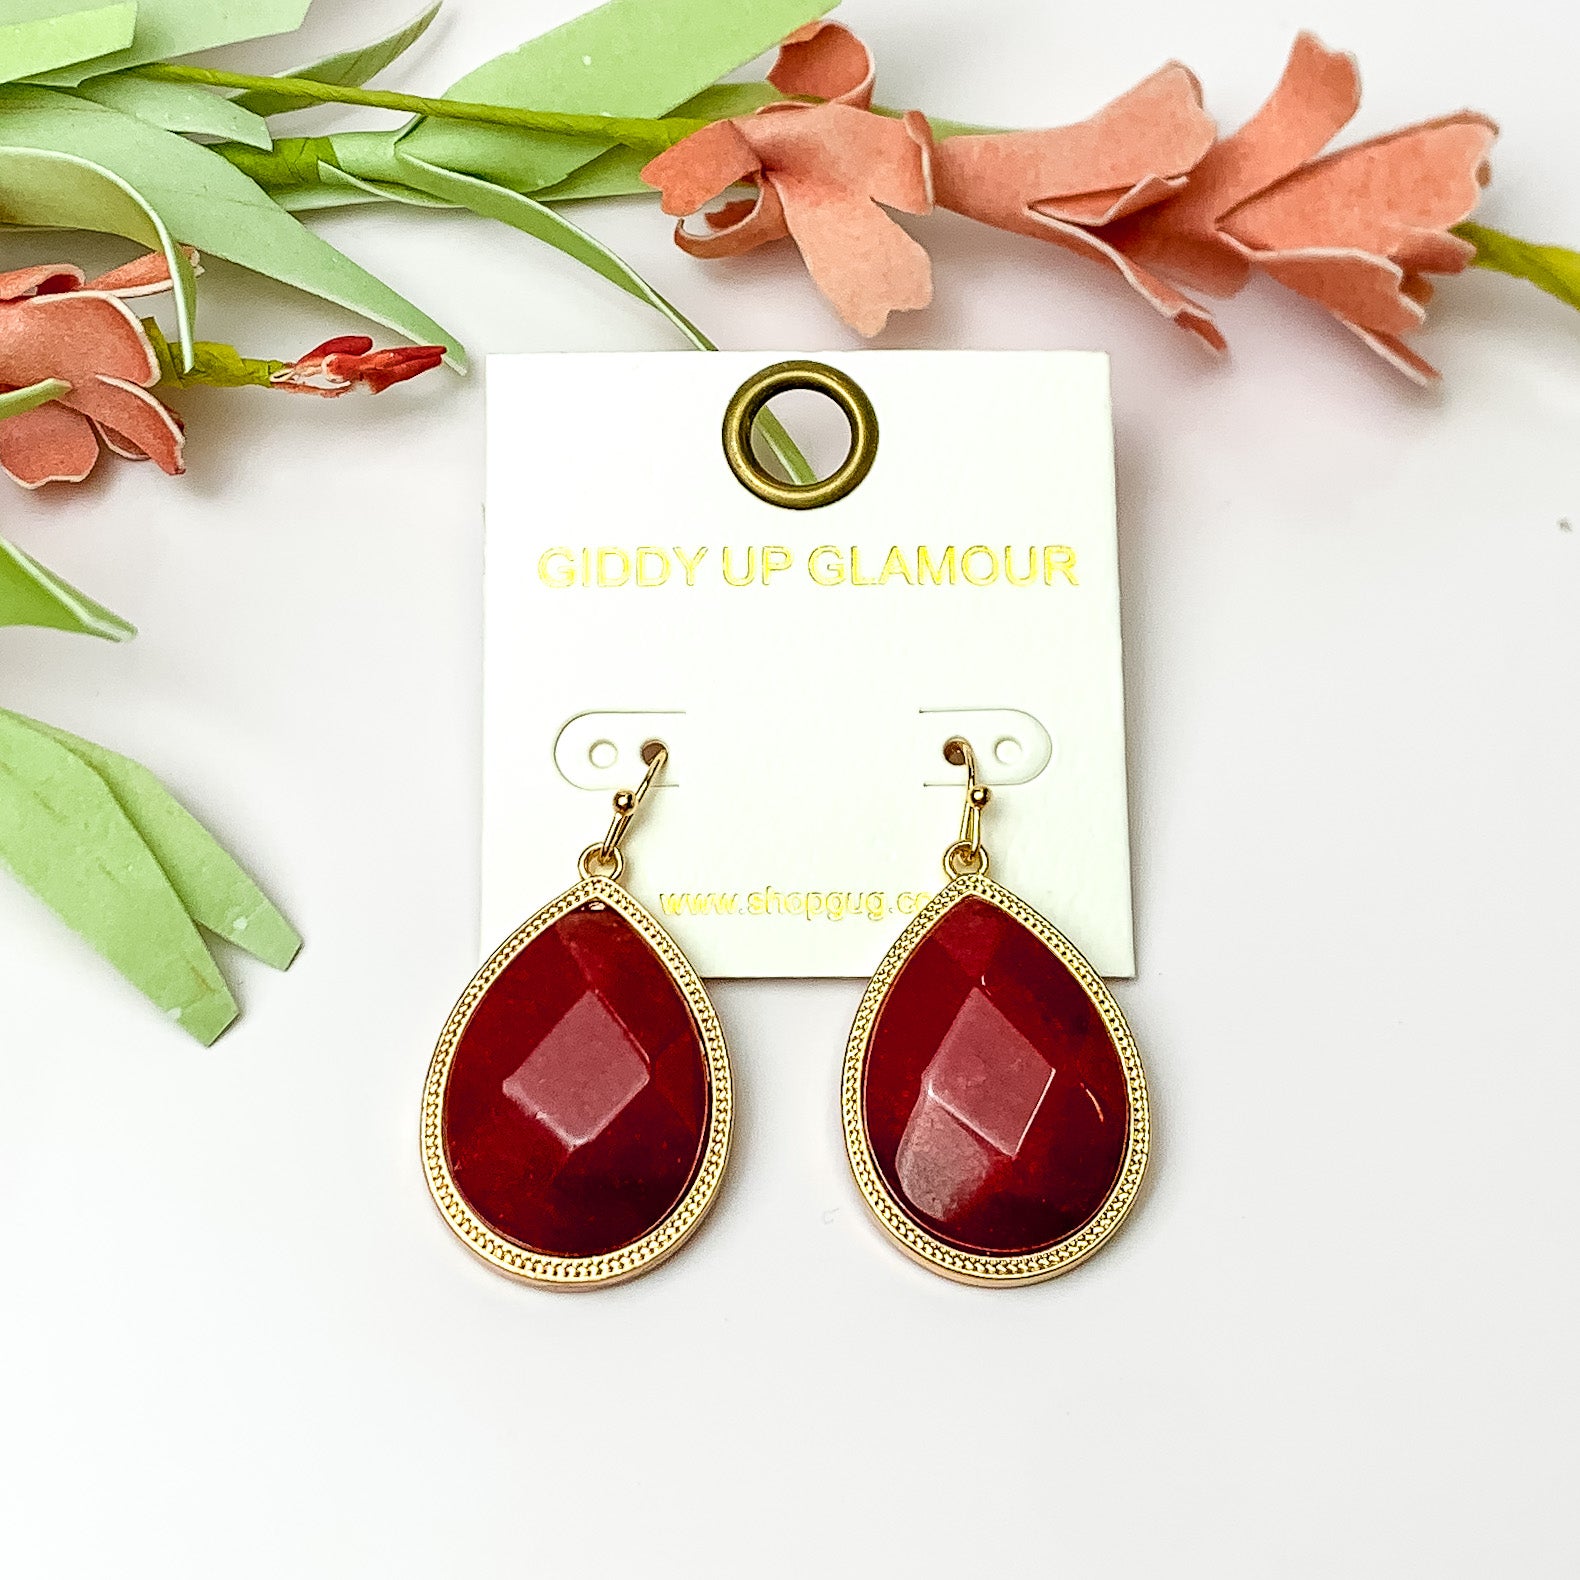 Maroon drop earrings with gold tone outline. Pictured on a white background with flowers at the top.